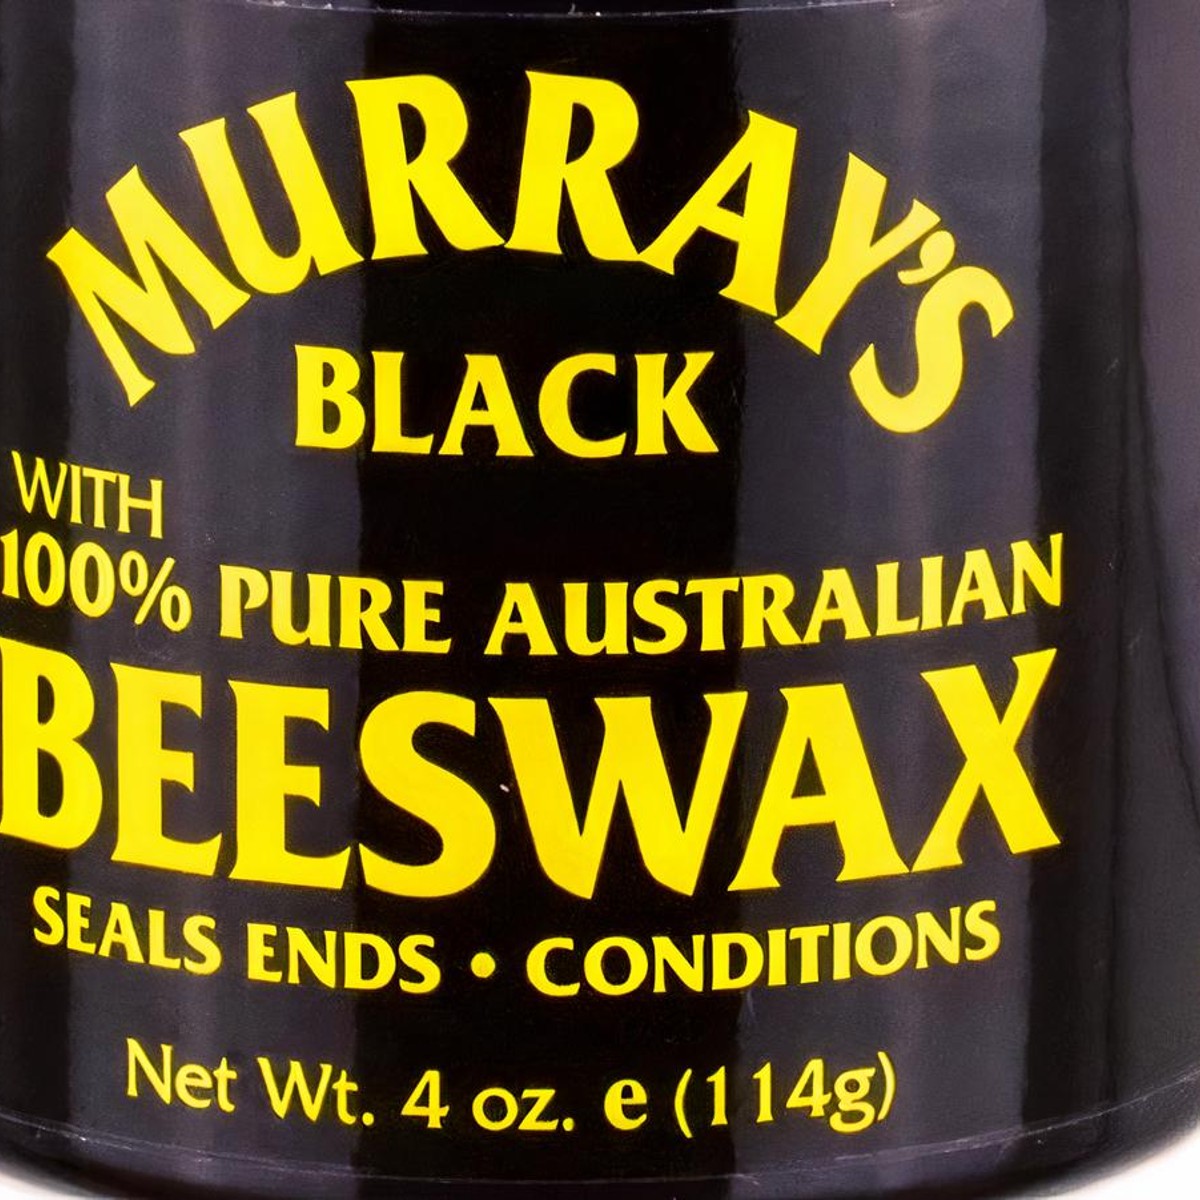 Murrays 100% Pure Beeswax 4 oz (5 Pack)